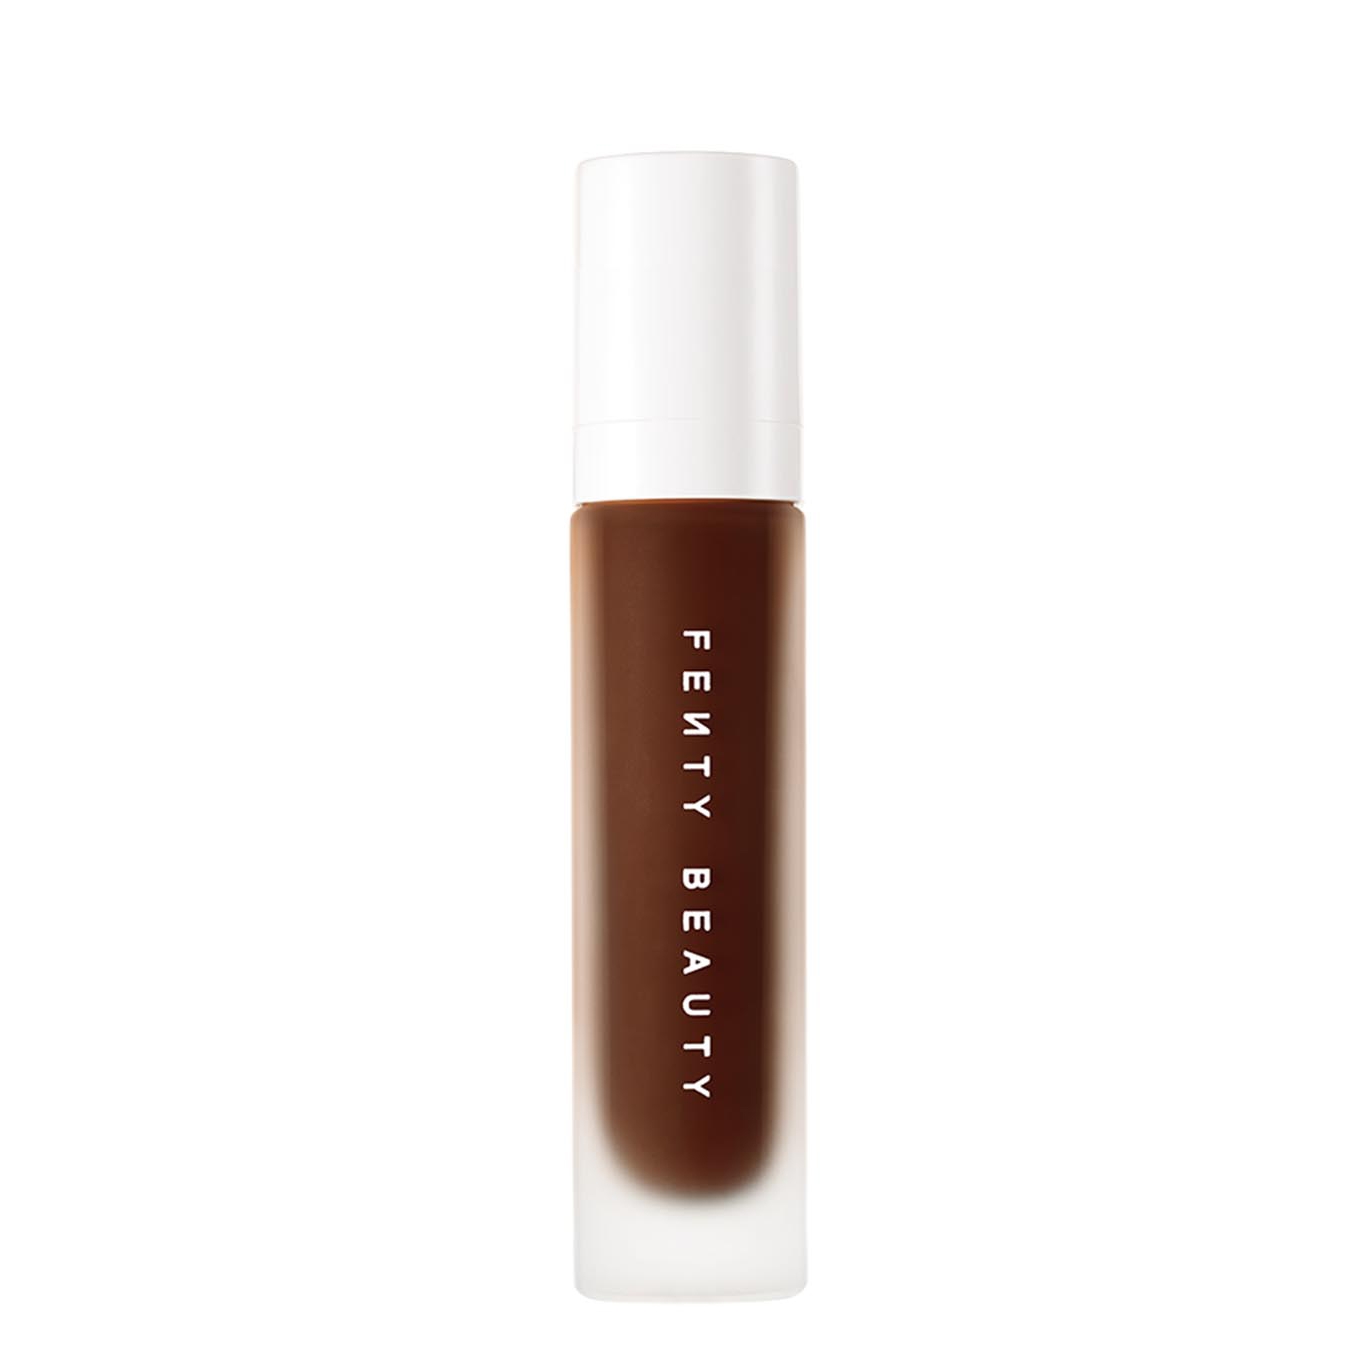 Pro Filt'r Shade Refinement, Foundation, Light-as-air